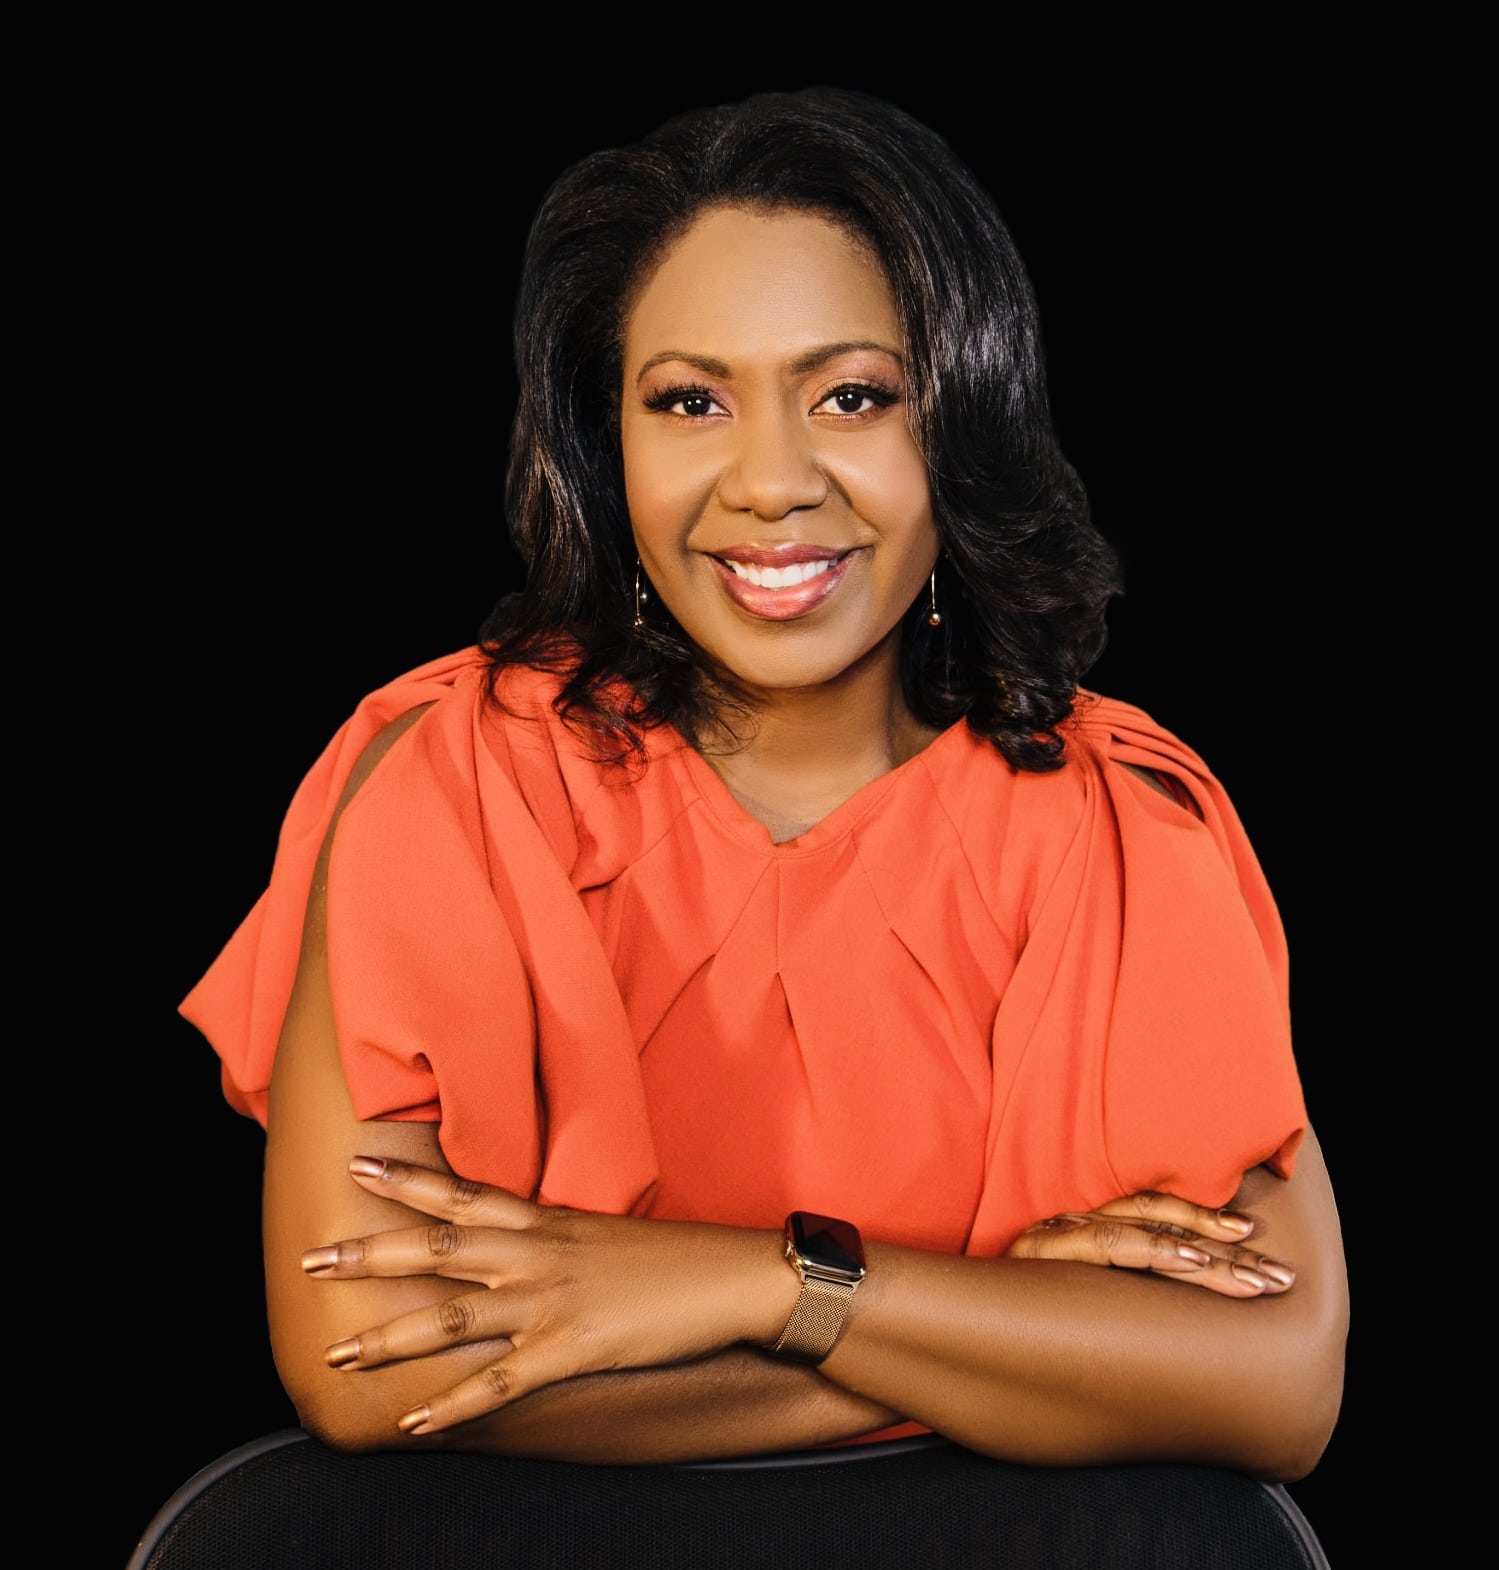 Photo of NMF President and CEO Michellene Davis in front of a black background wearing an orange blouse.